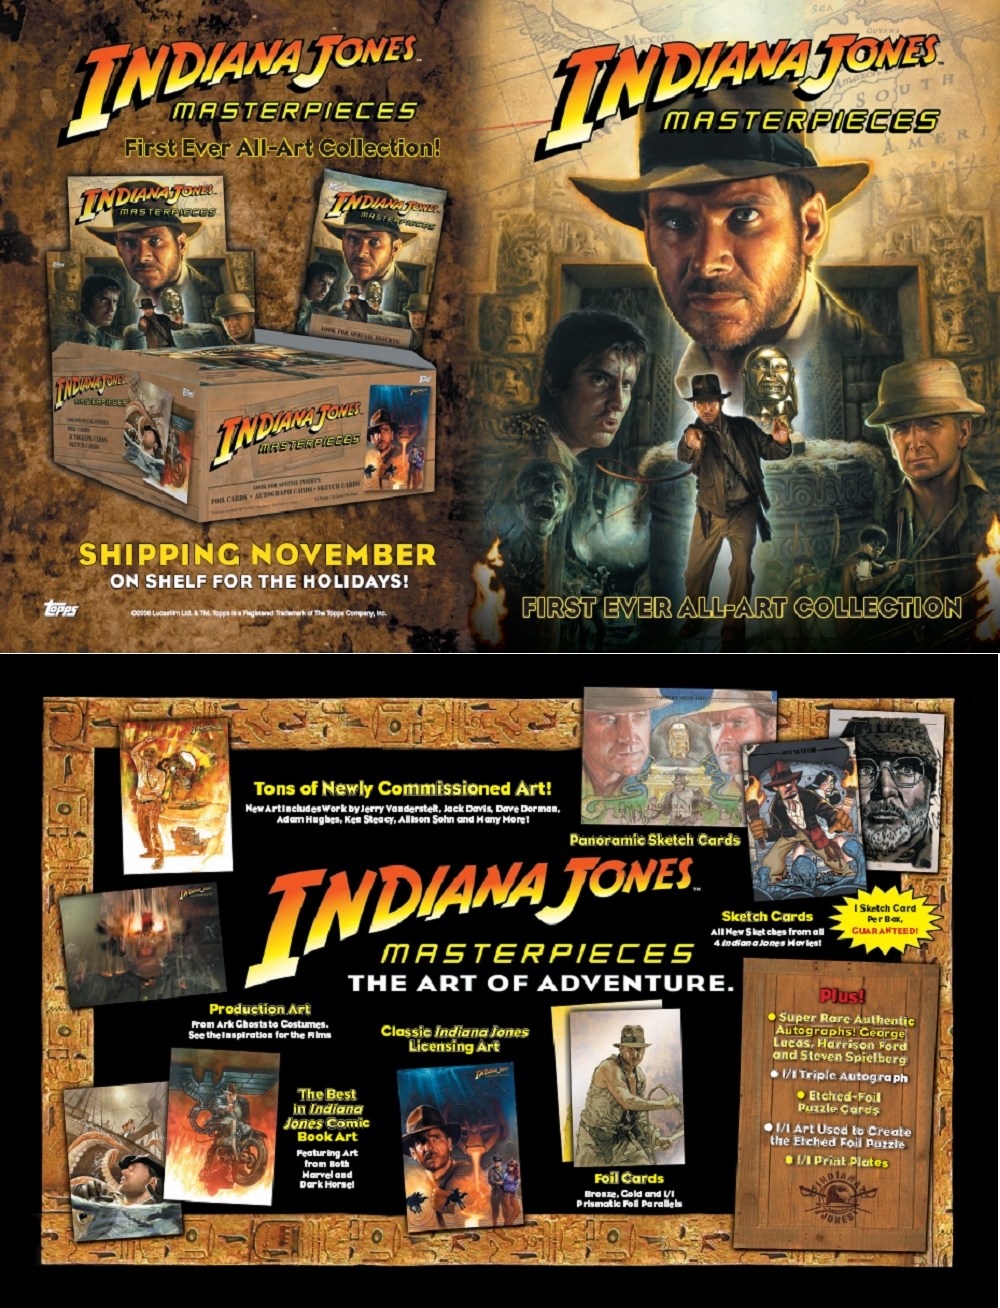 The Infernal Machine 2008 Topps Indiana Jones Masterpieces Card #65 Video Games